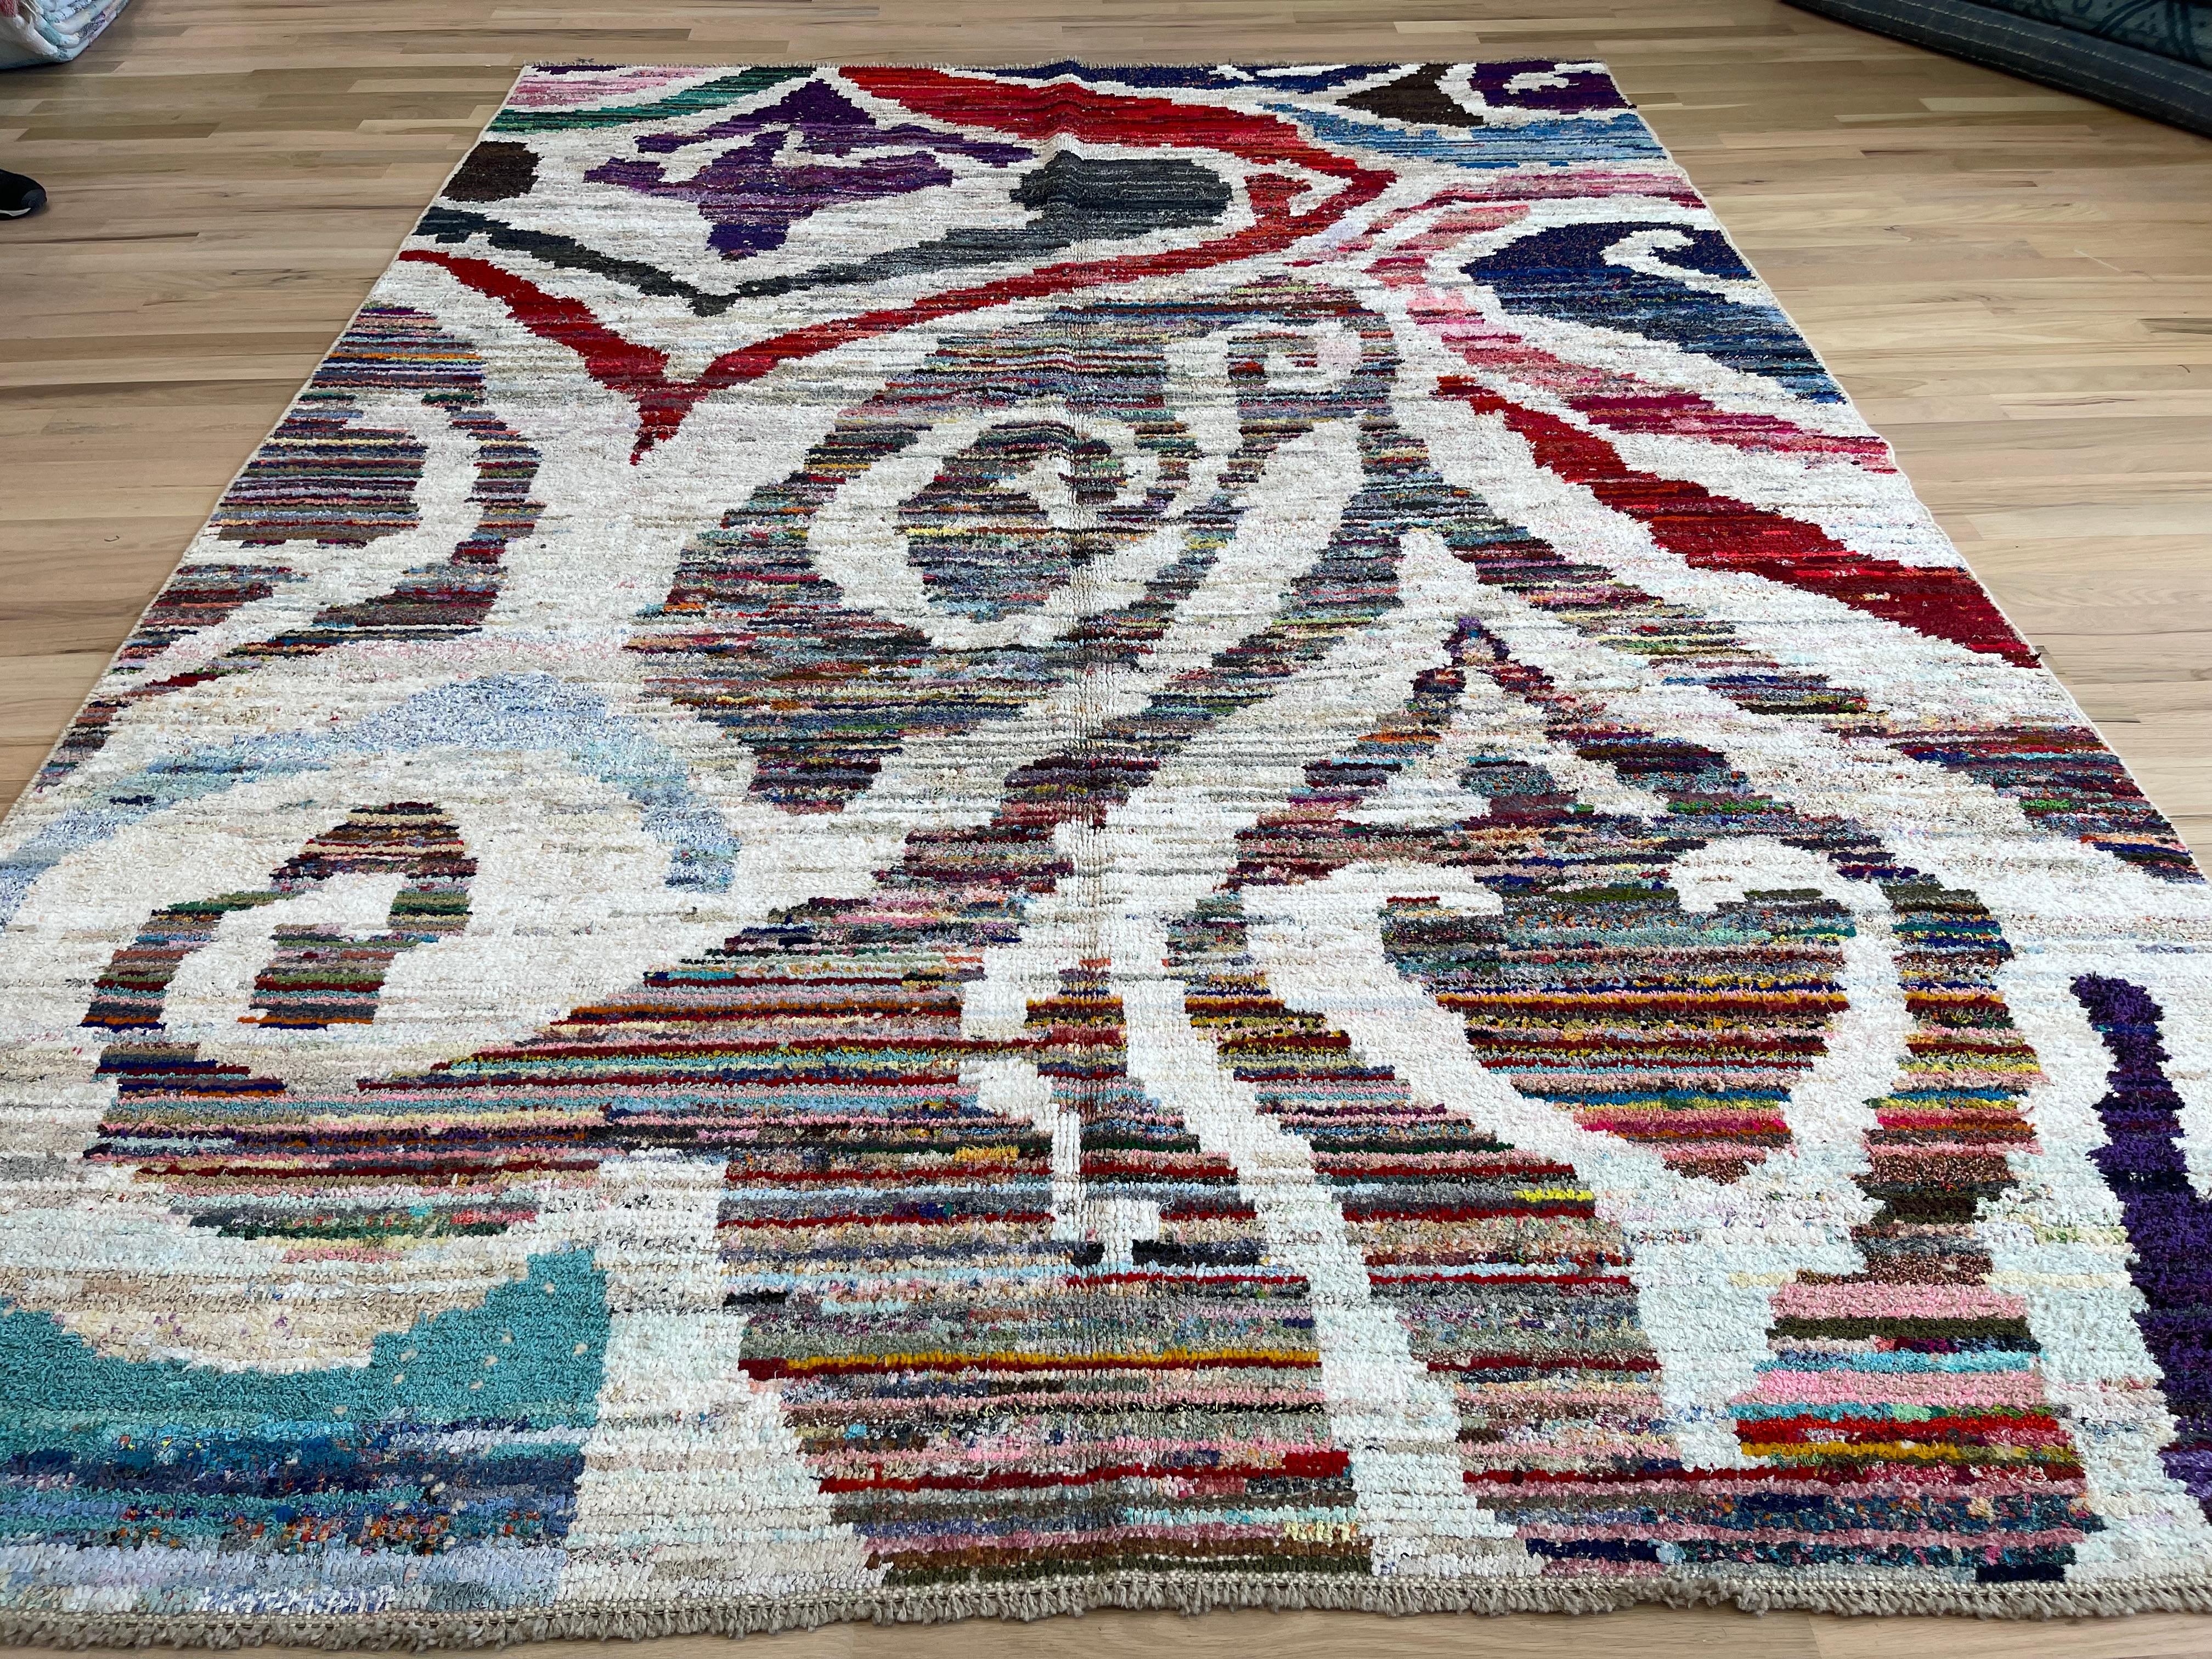 Transform your space with our exquisite Turkish rug in stunning shades of blue, red, and purple. Made from all wool, this bold and ethnic rug adds a touch of luxury and warmth to any room. Elevate your decor with this unique and vibrant piece!